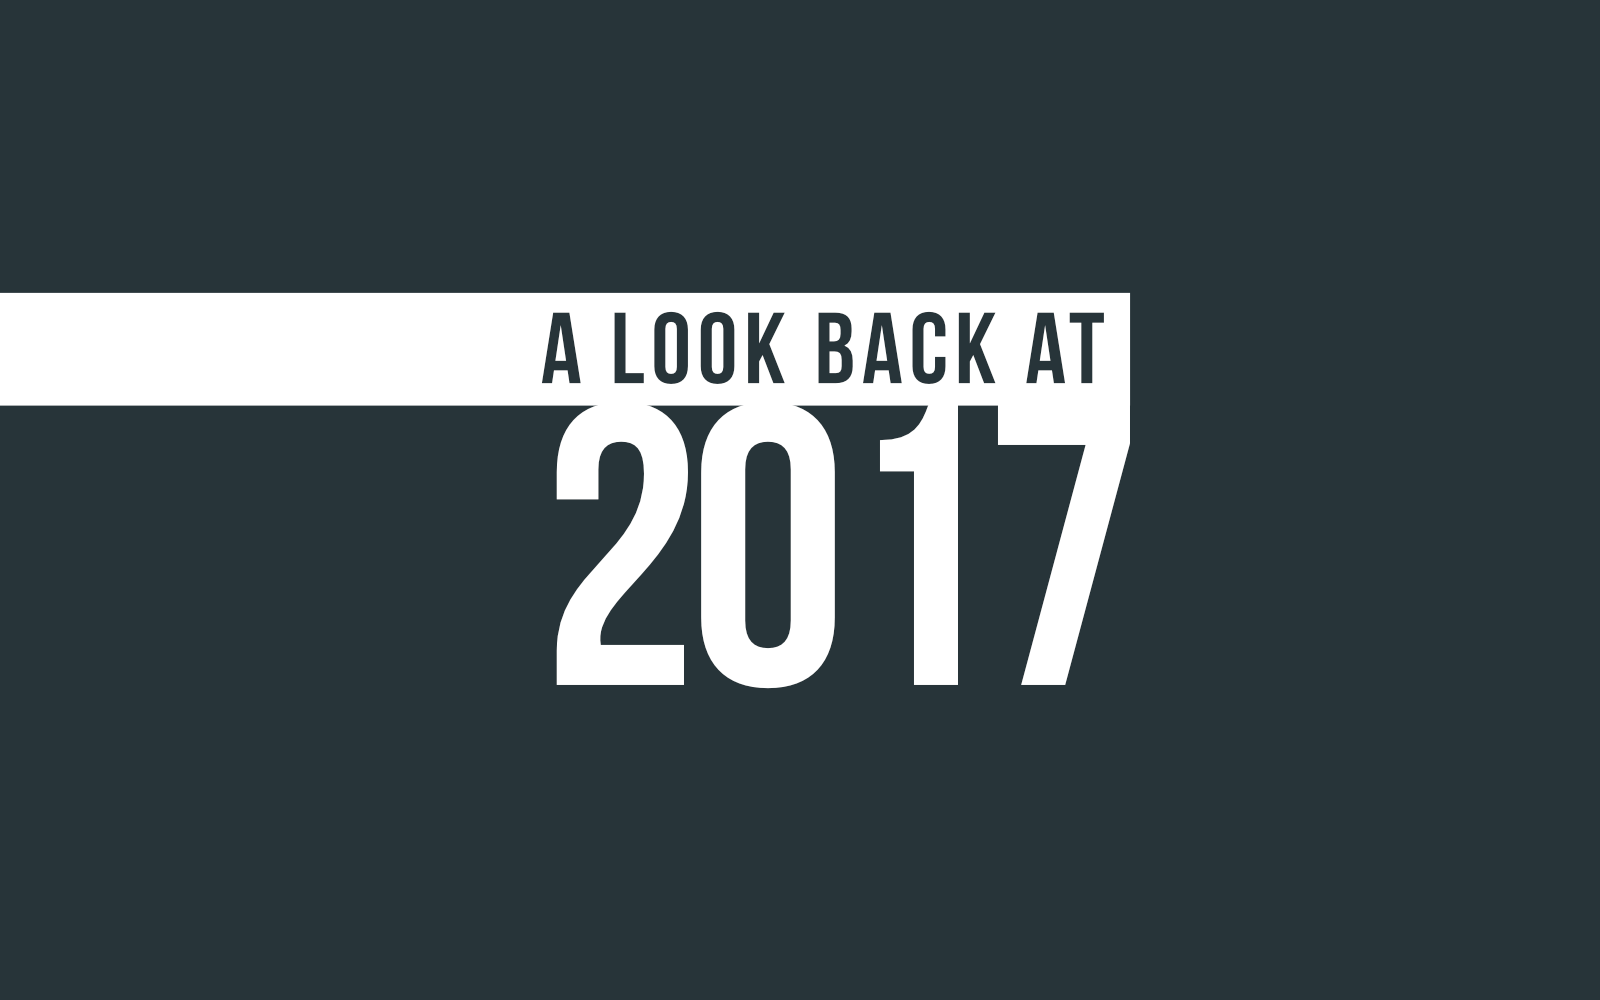 A Look Back